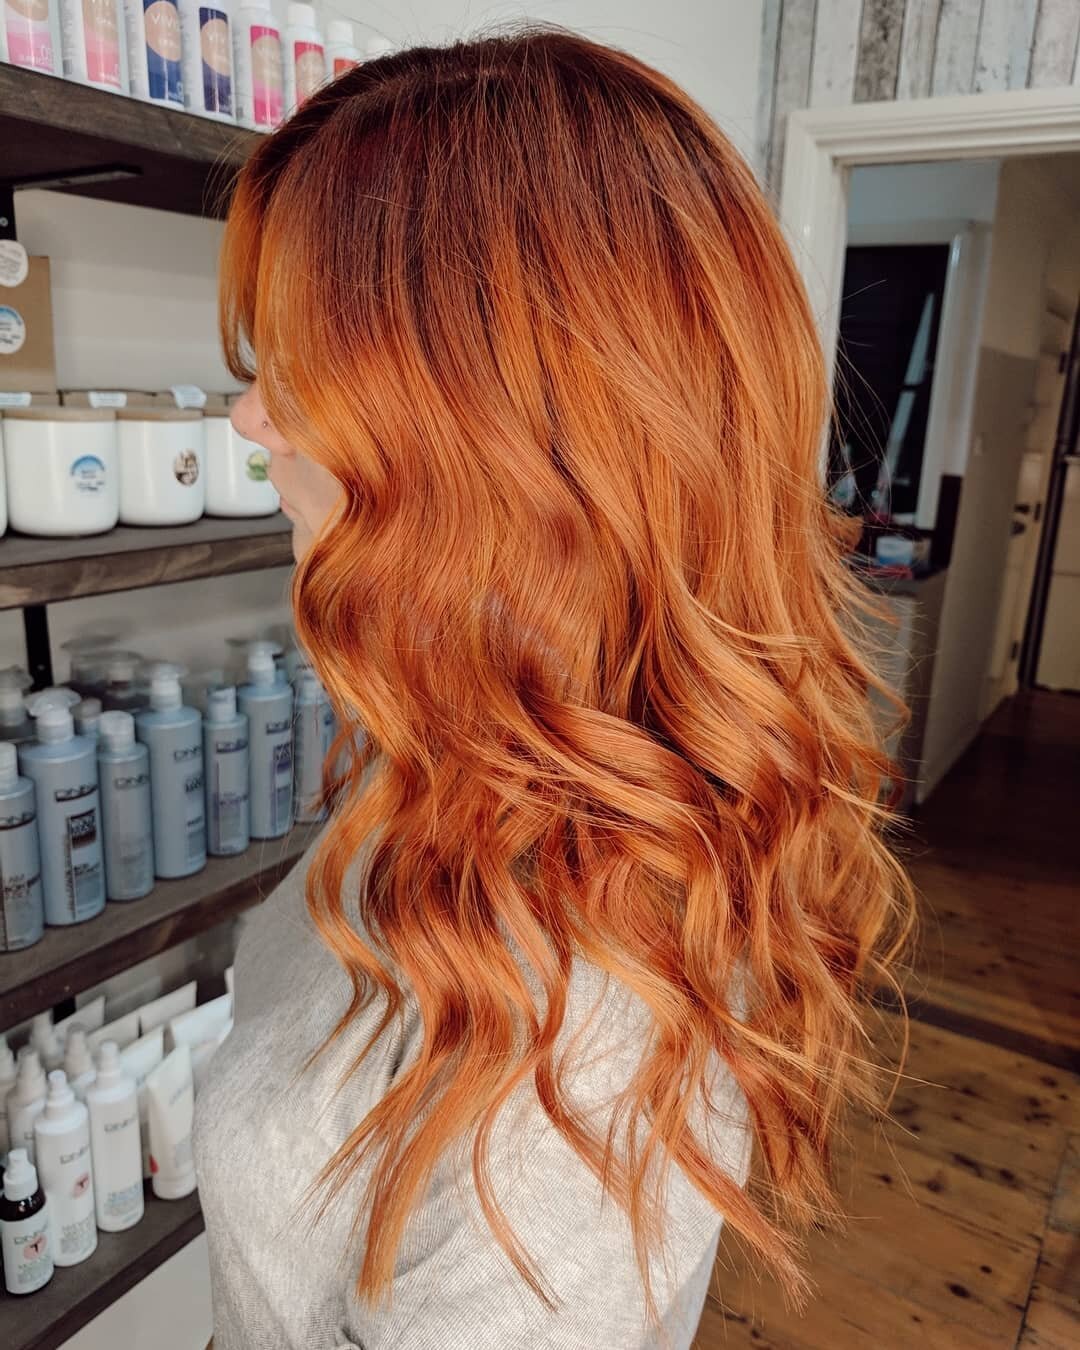 Shout out to all the ladies who rock a bright &amp; bold colour.&nbsp;🔥 
​
​Results achieved by:&nbsp;
​🍃 Long Hair Colour, Ladies Long Haircut and Style.
🍃 DNA Organics Professional, UV Guard Moist Creme, Heatsheild Protectamist, Humiseal Finishi